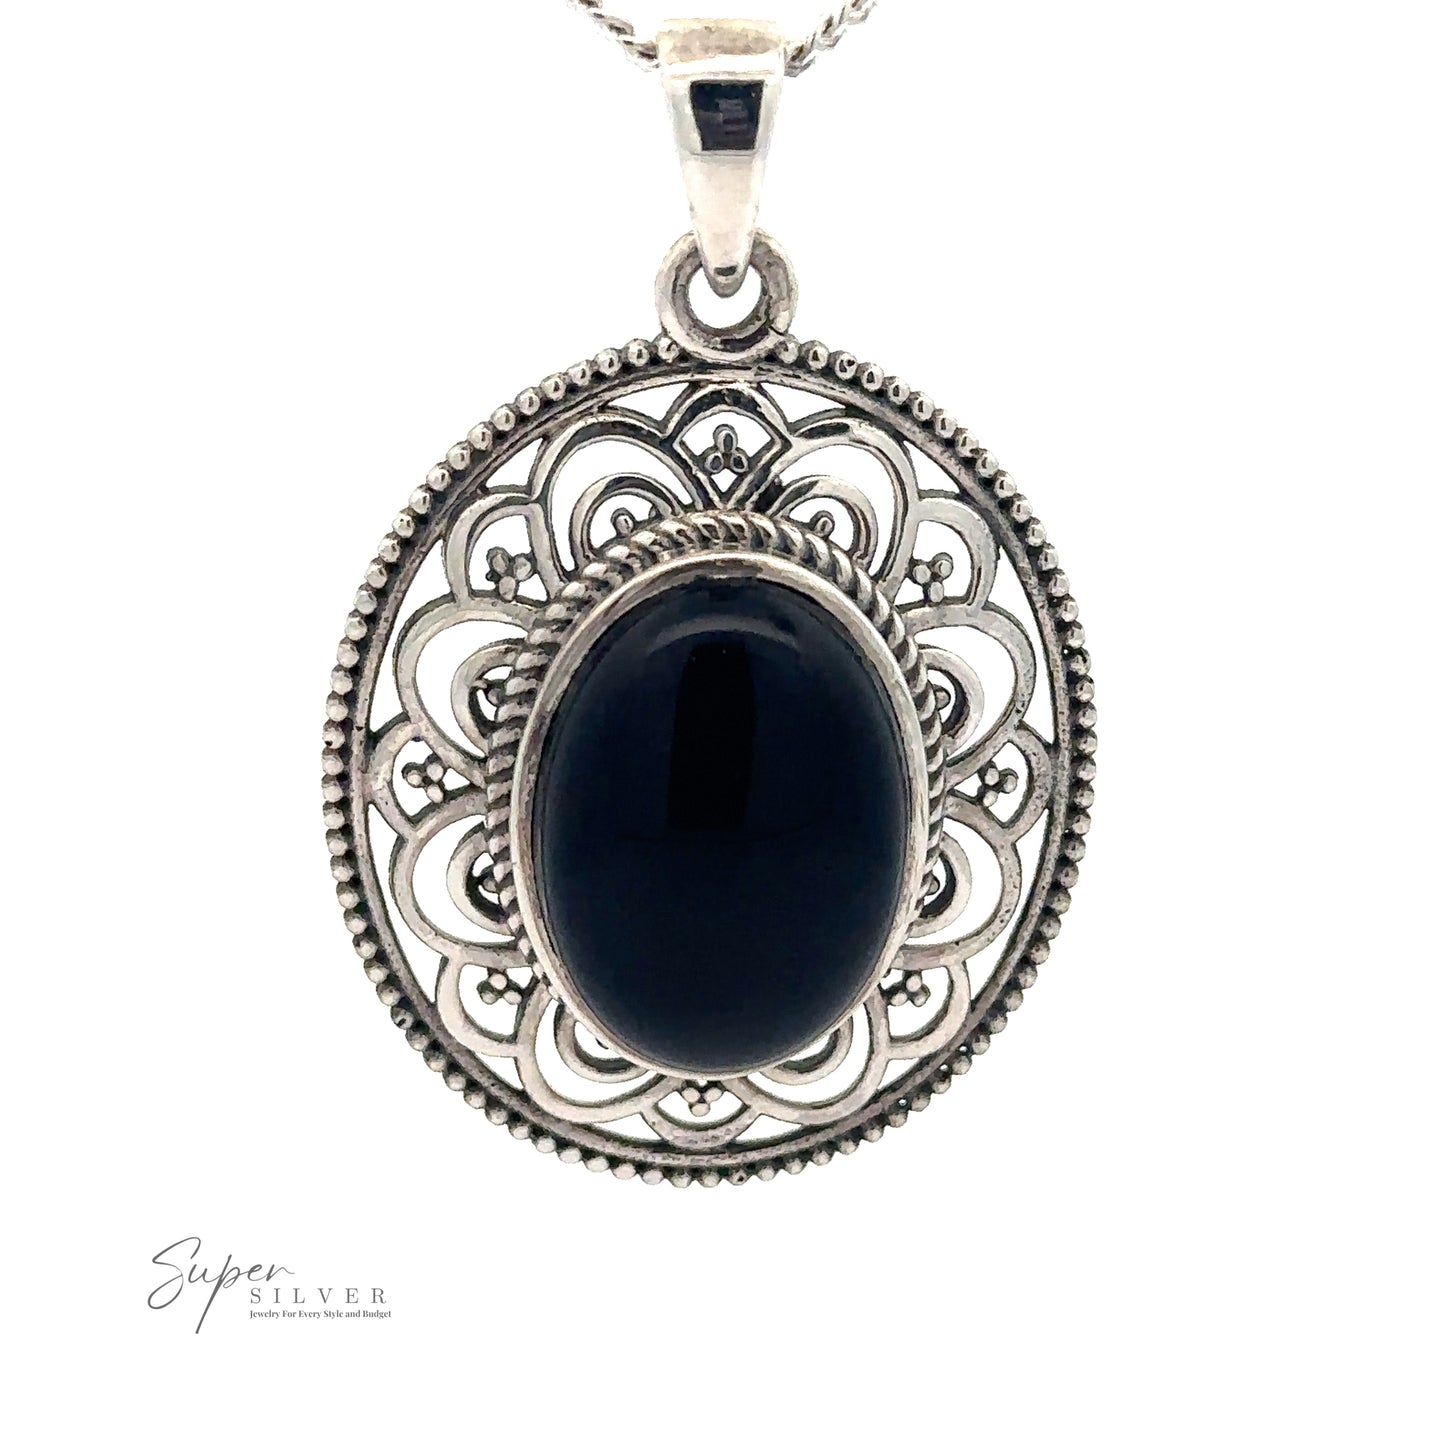 
                  
                    An Oval Stone Pendant with Filigree Border features an ornate filigree design with a large, polished labradorite center, hung on a thin sterling silver chain. The logo "Super Silver" is visible in the bottom left corner.
                  
                